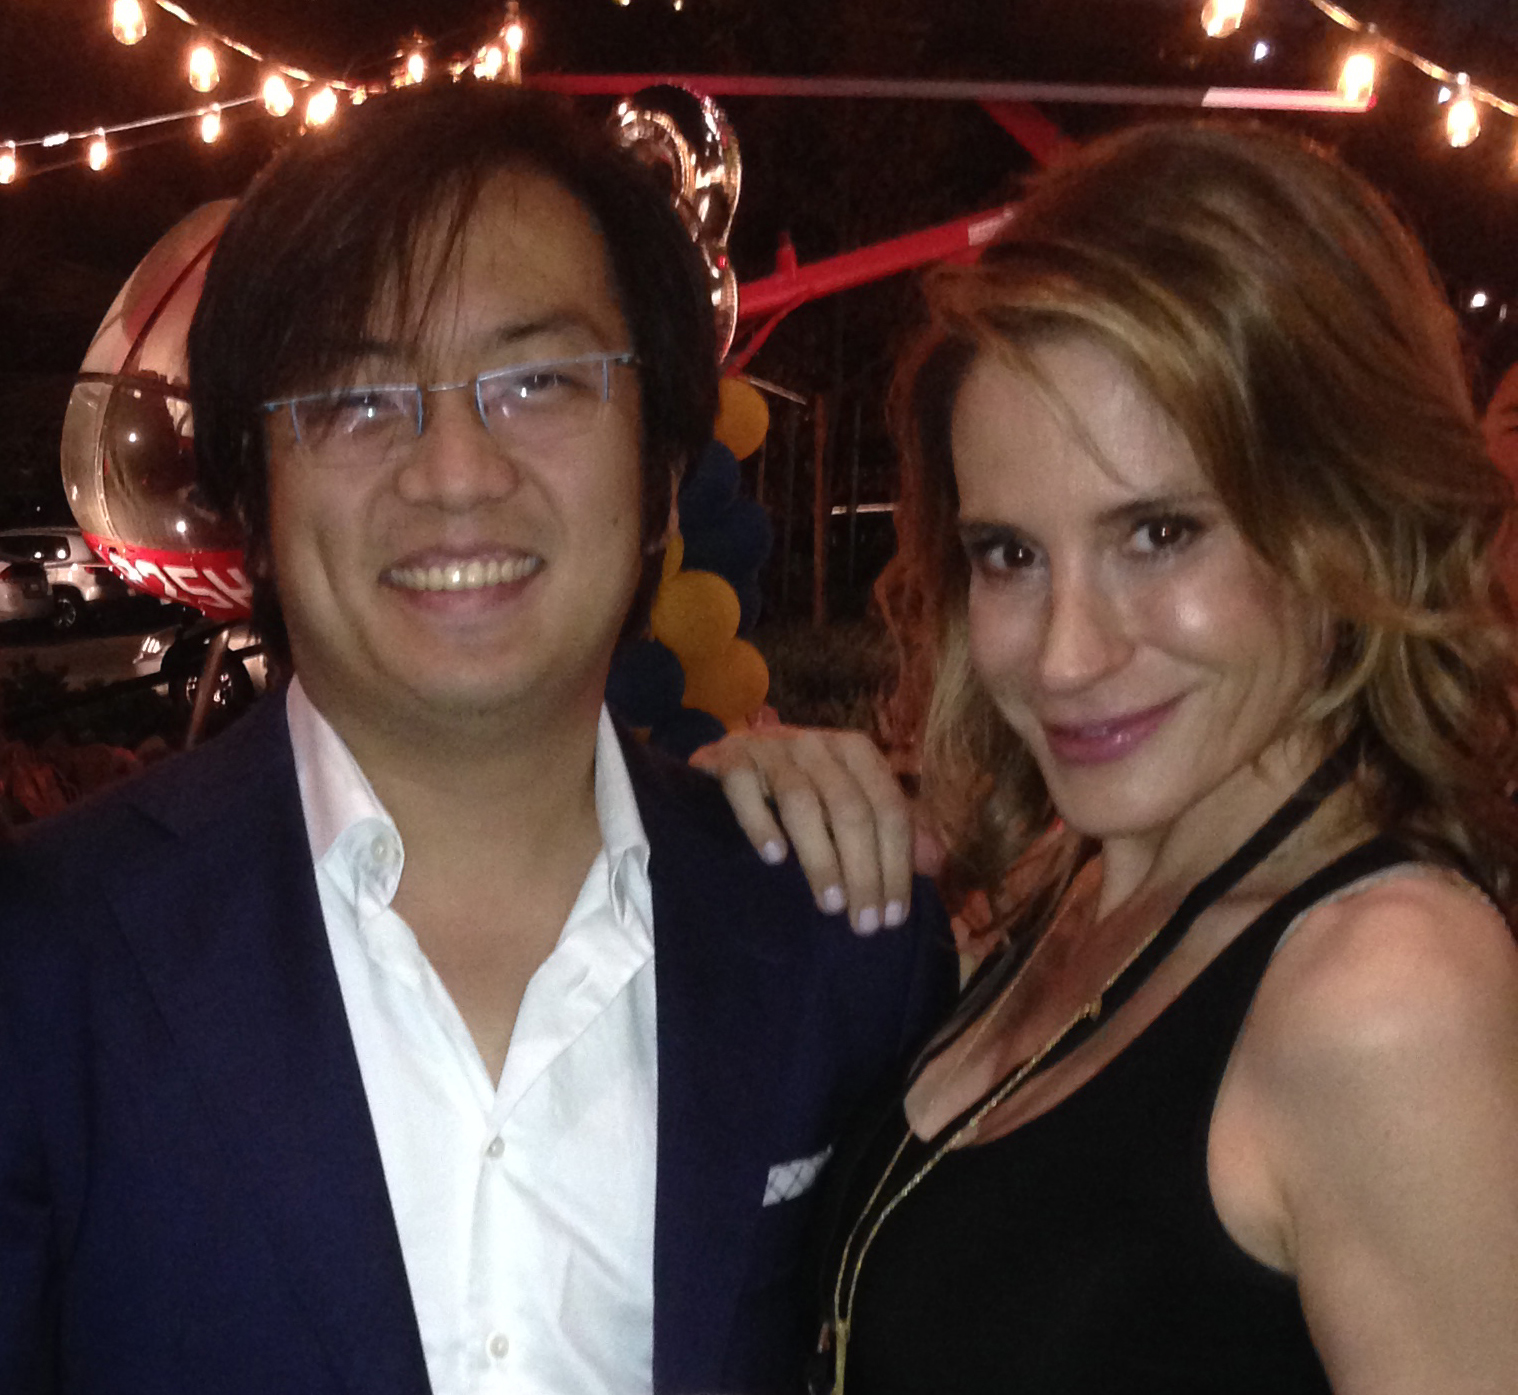 VGHS Season 3 premiere at Youtube. Co-creator/director Freddie Wong with actress Elizabeth Greer